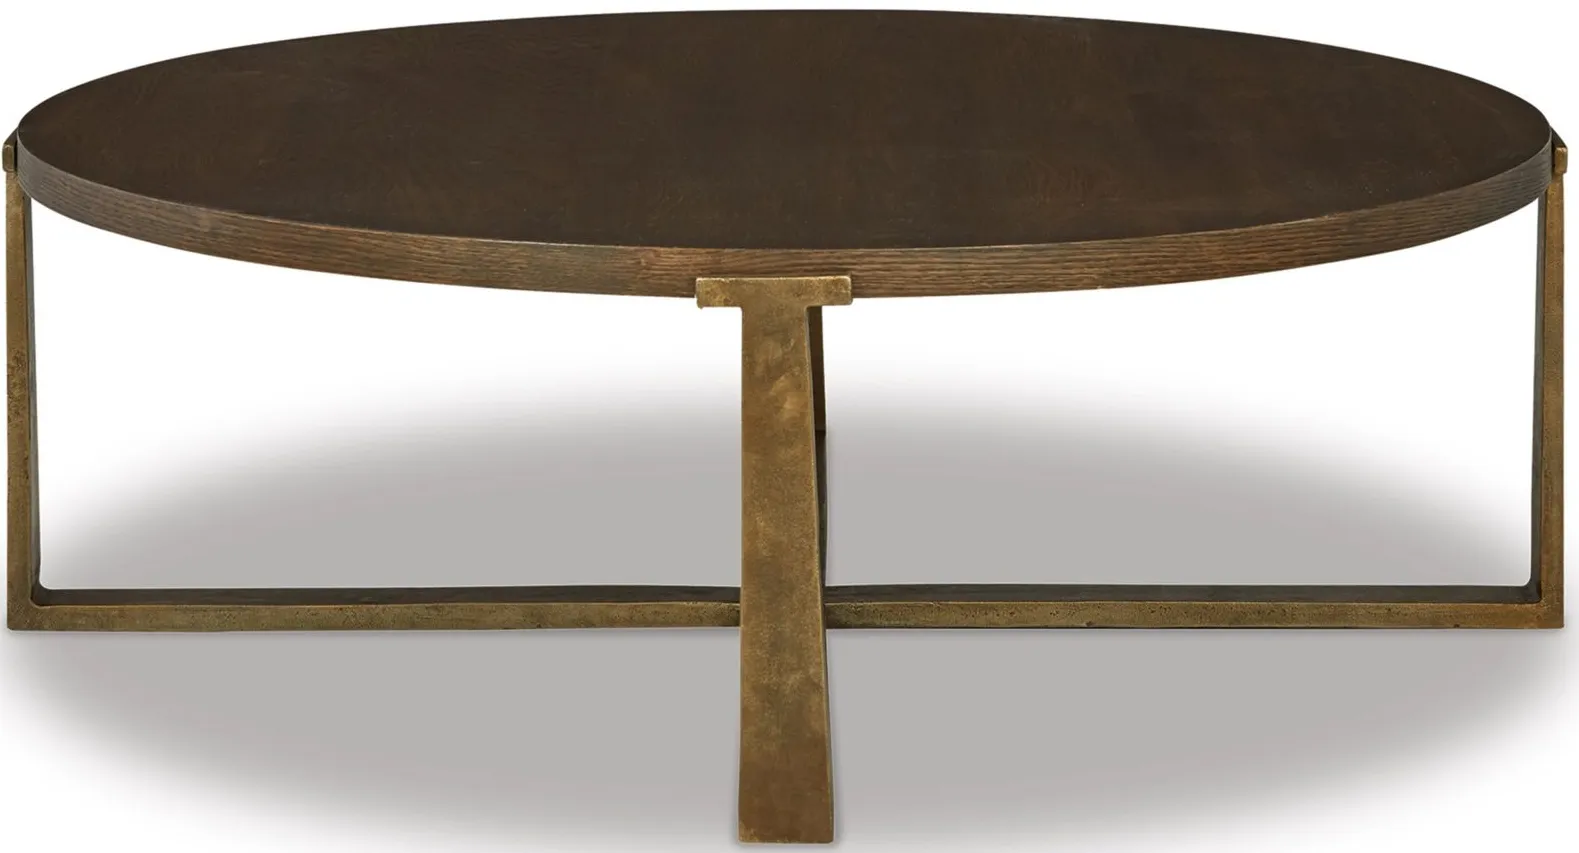 Balintmore Round Coffee Table in Brown/Gold Finish by Ashley Furniture